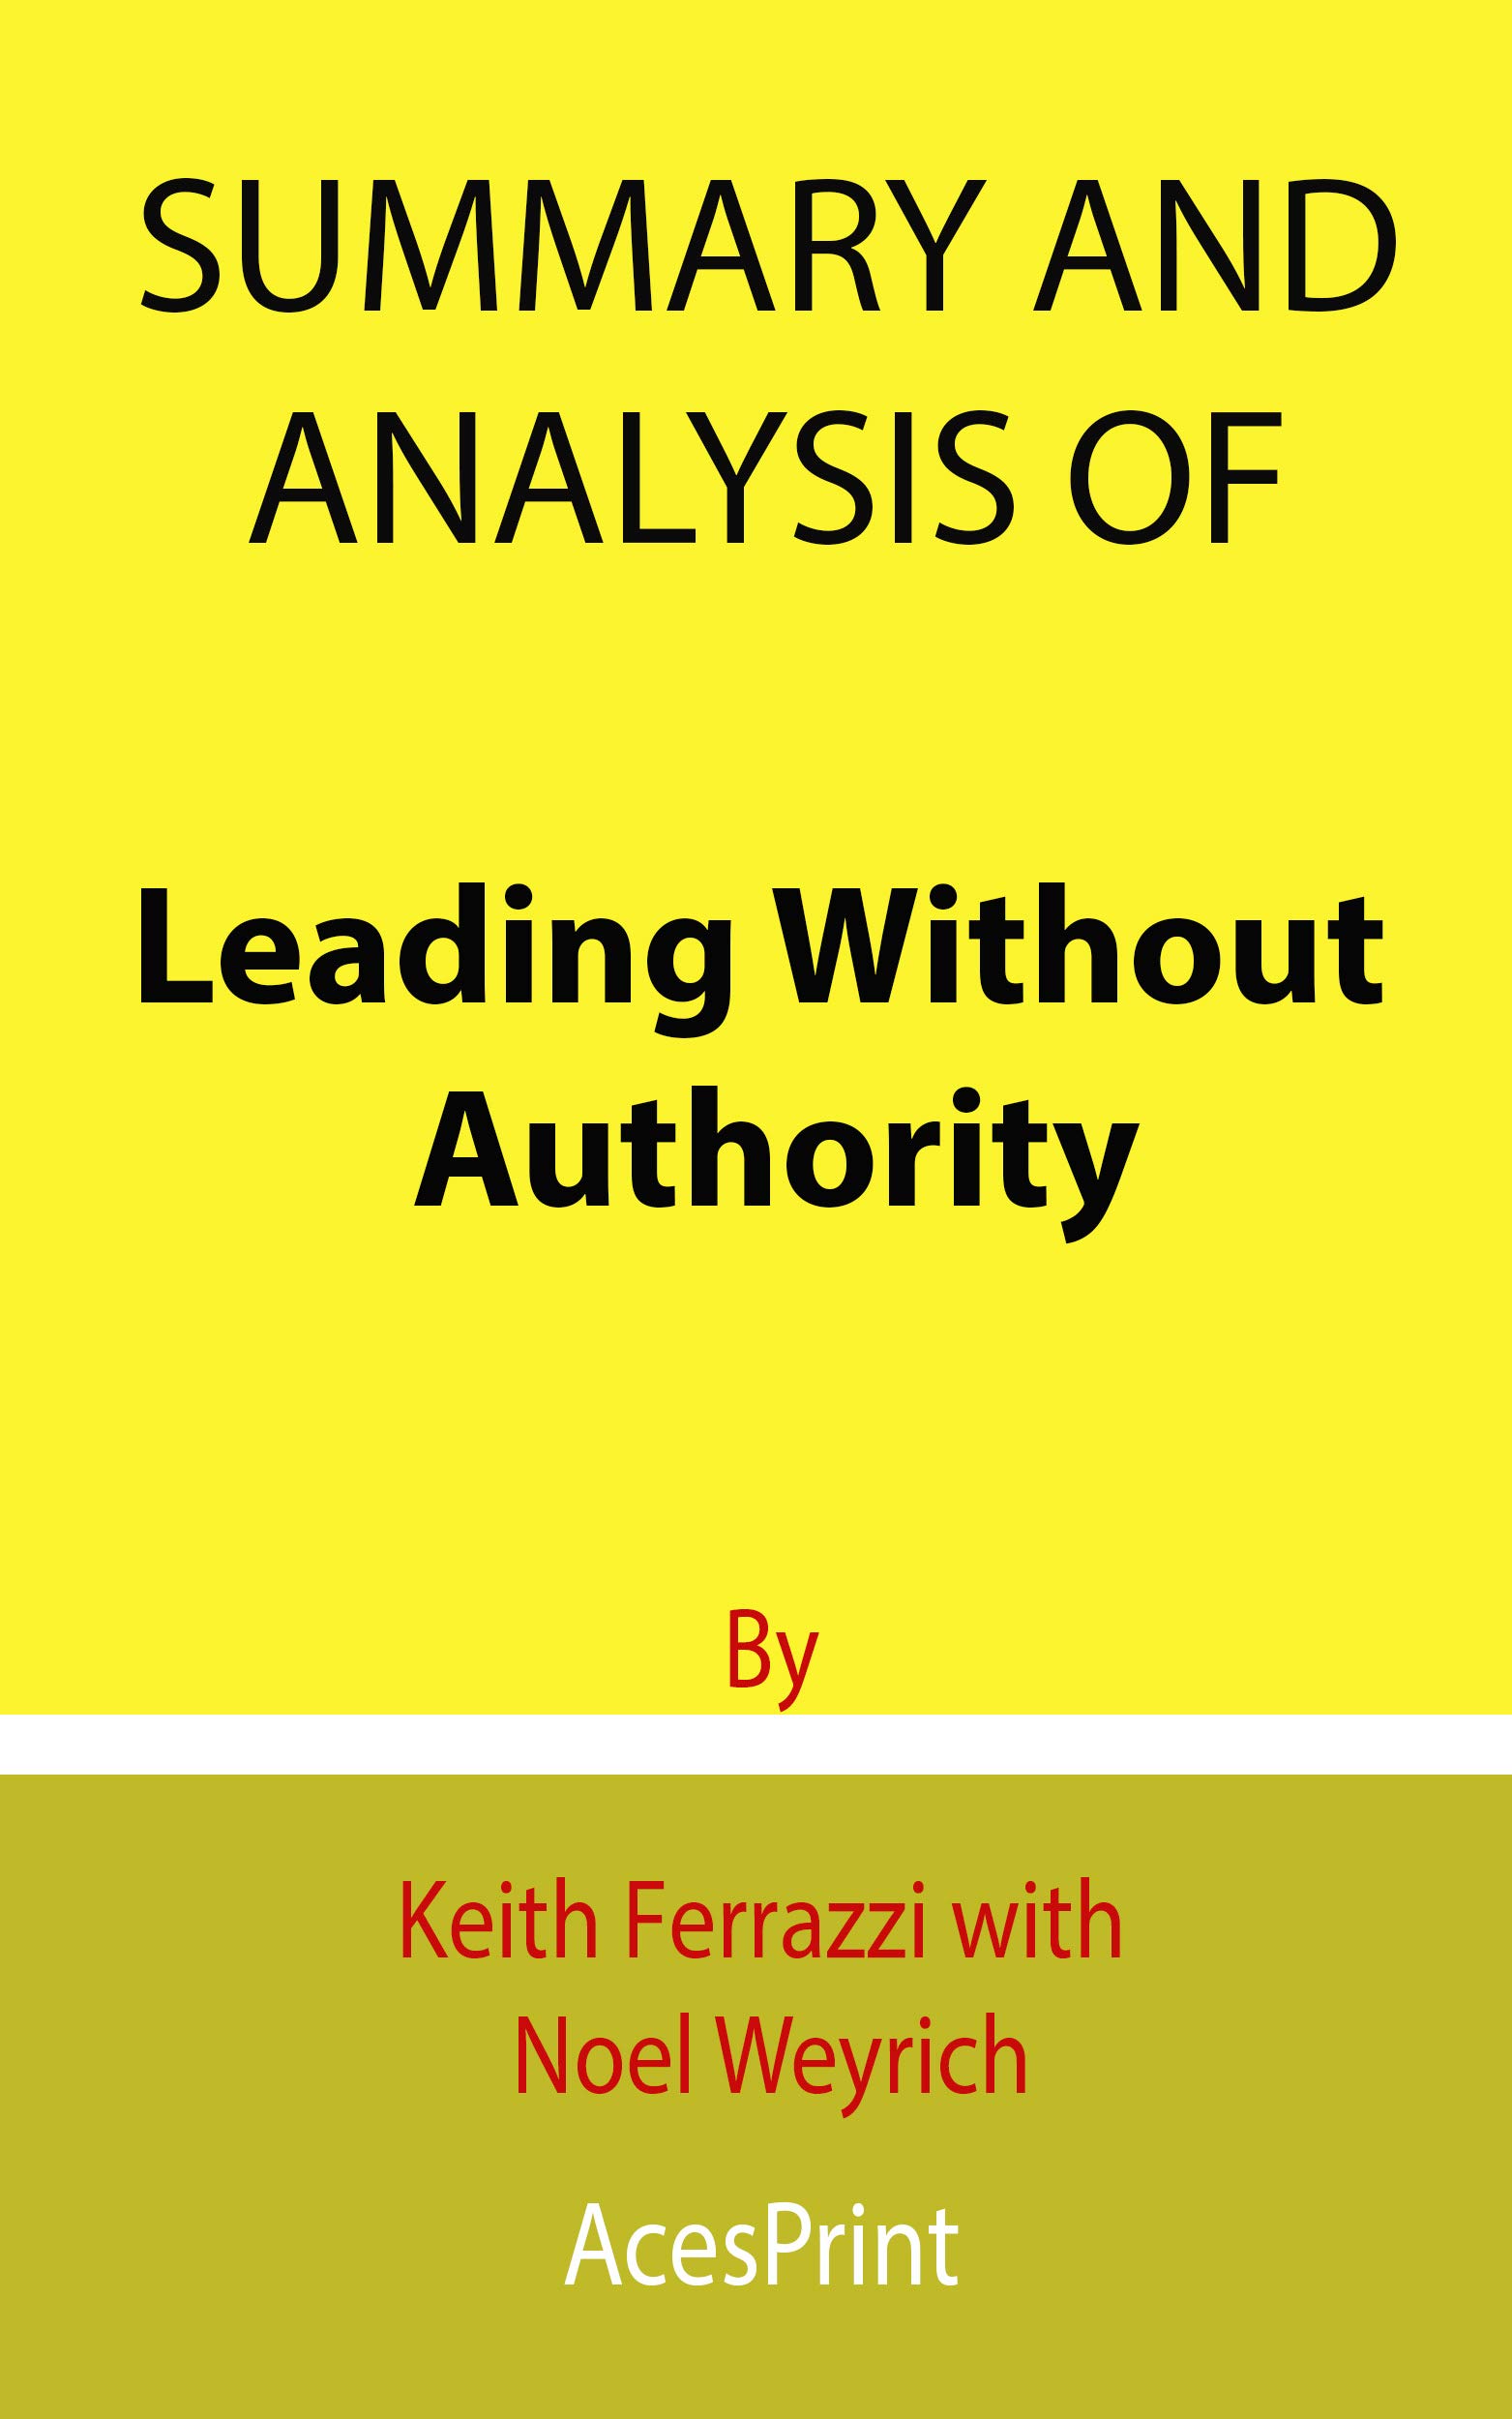 Leading Without Authority - Keith Ferrazzi with Noel Weyrich